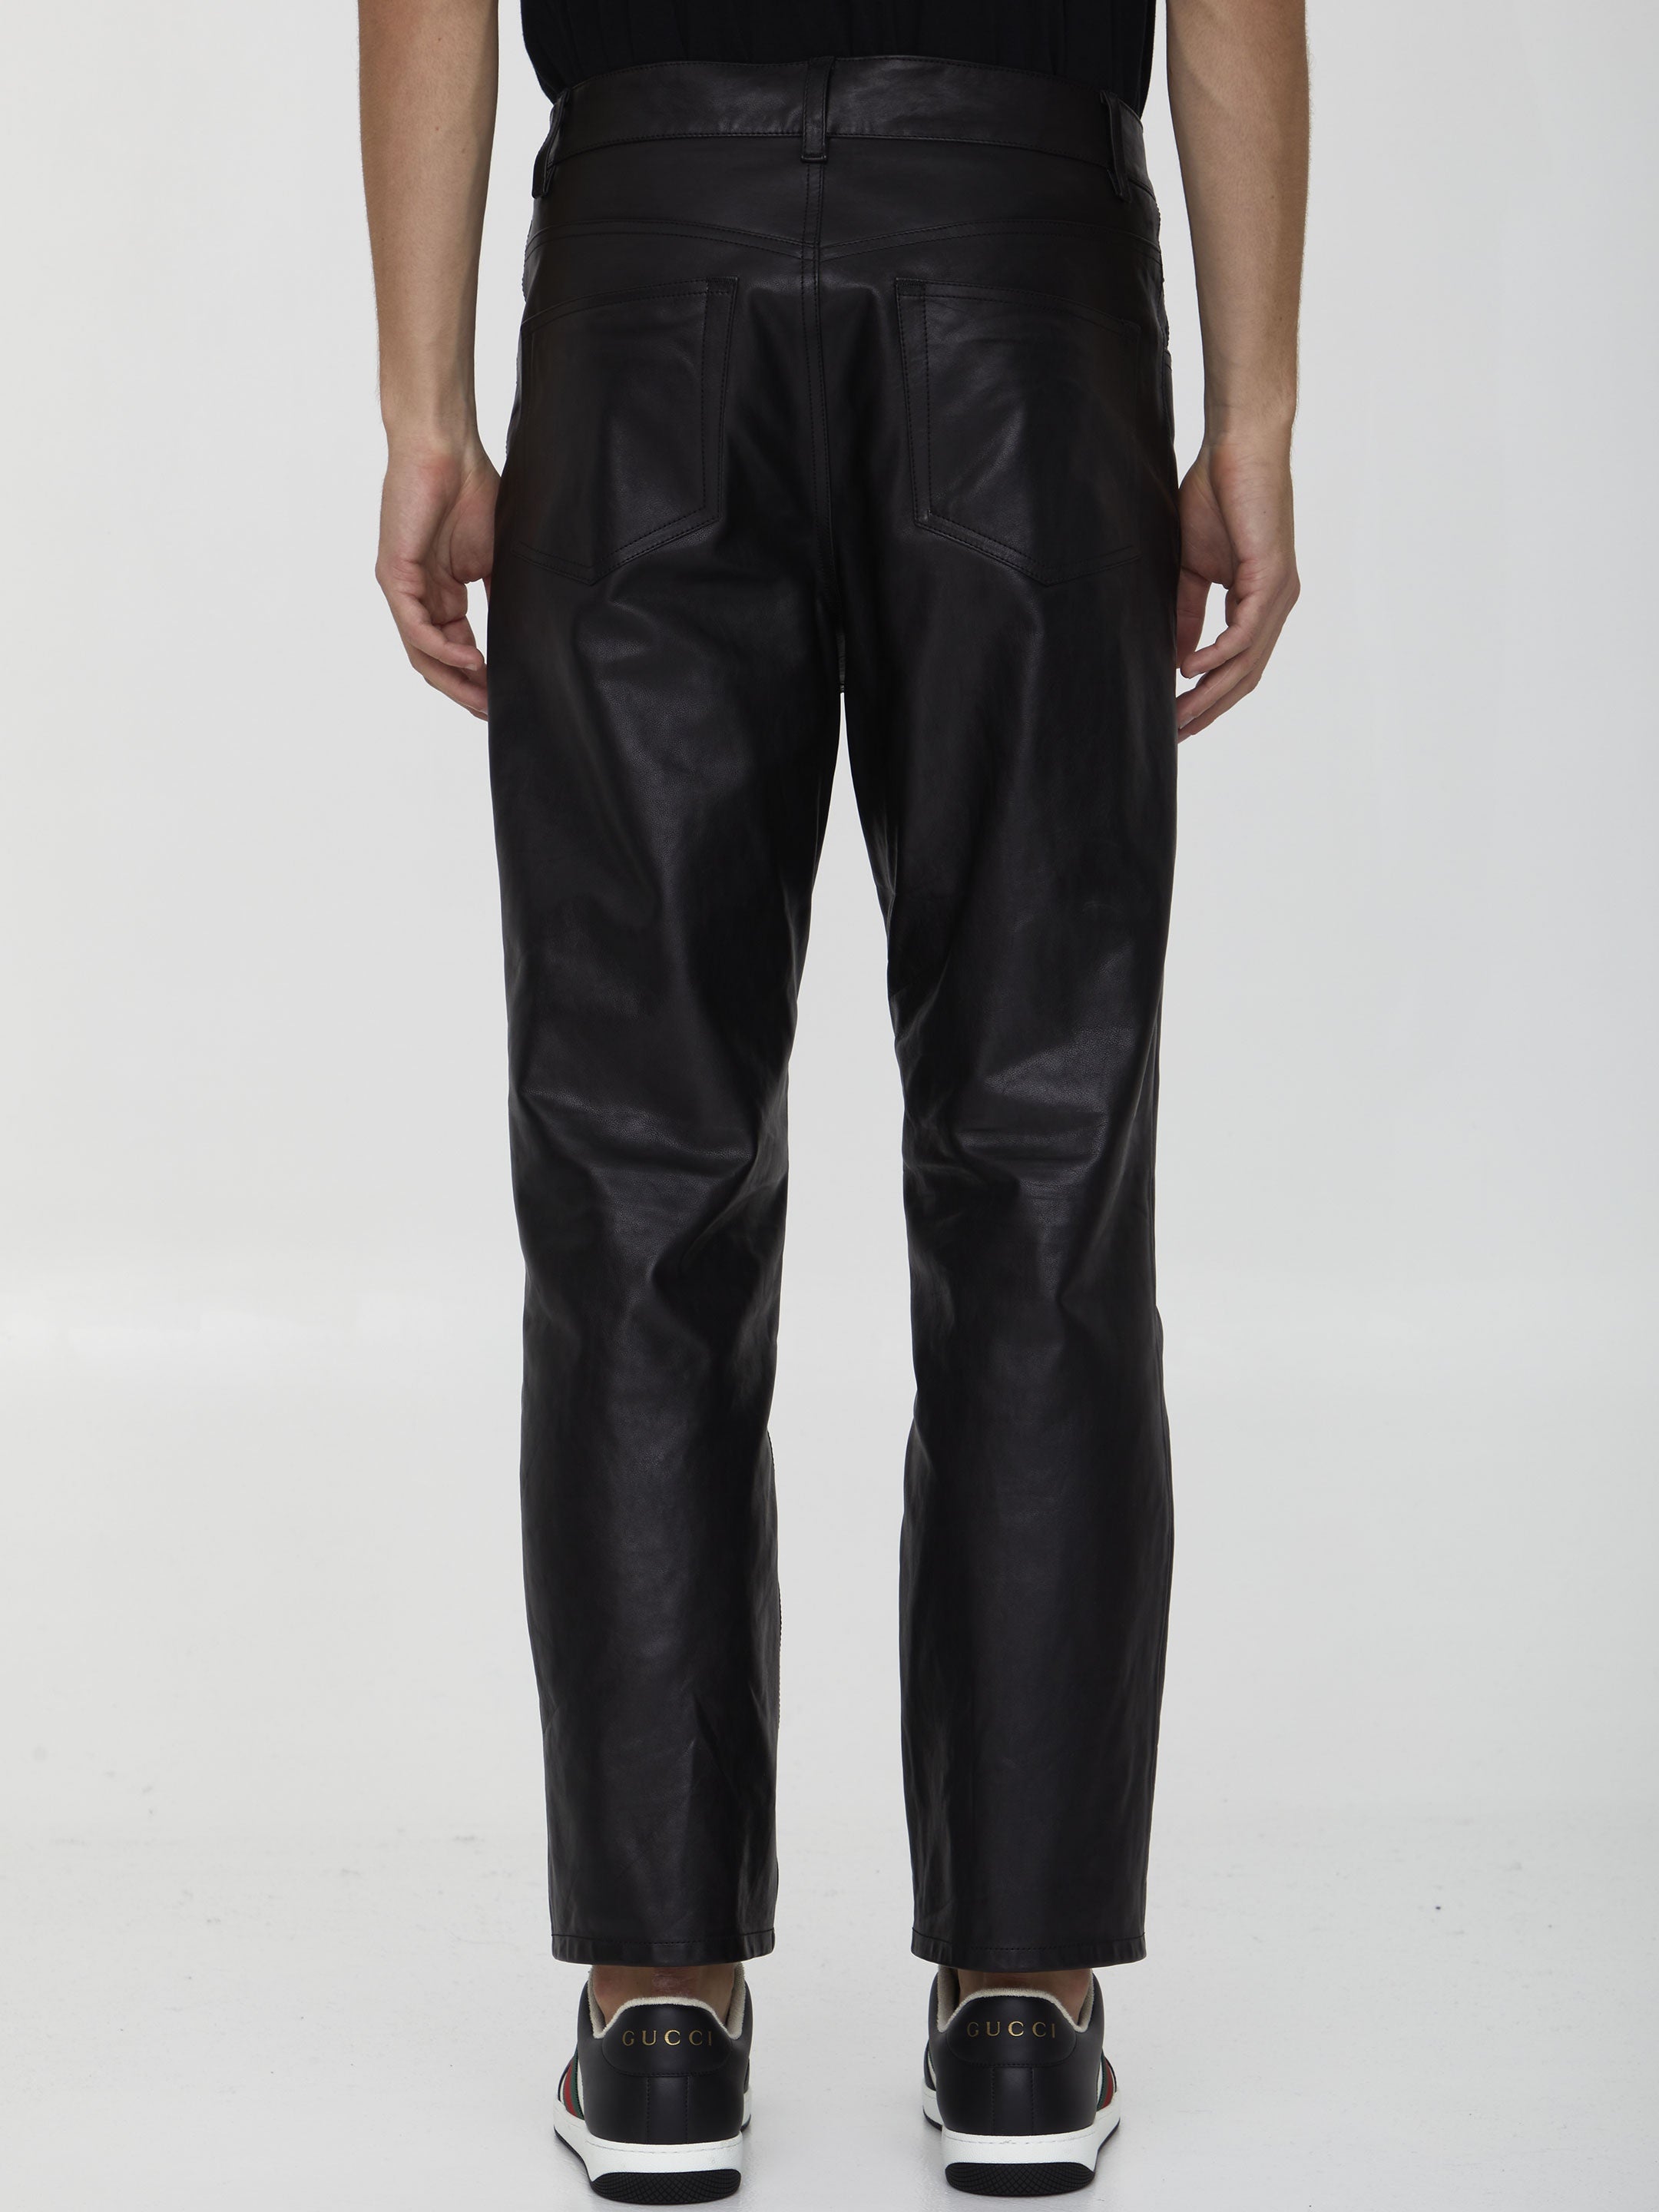 GUCCI-OUTLET-SALE-Shiny-leather-trousers-Hosen-48-BLACK-ARCHIVE-COLLECTION-4.jpg